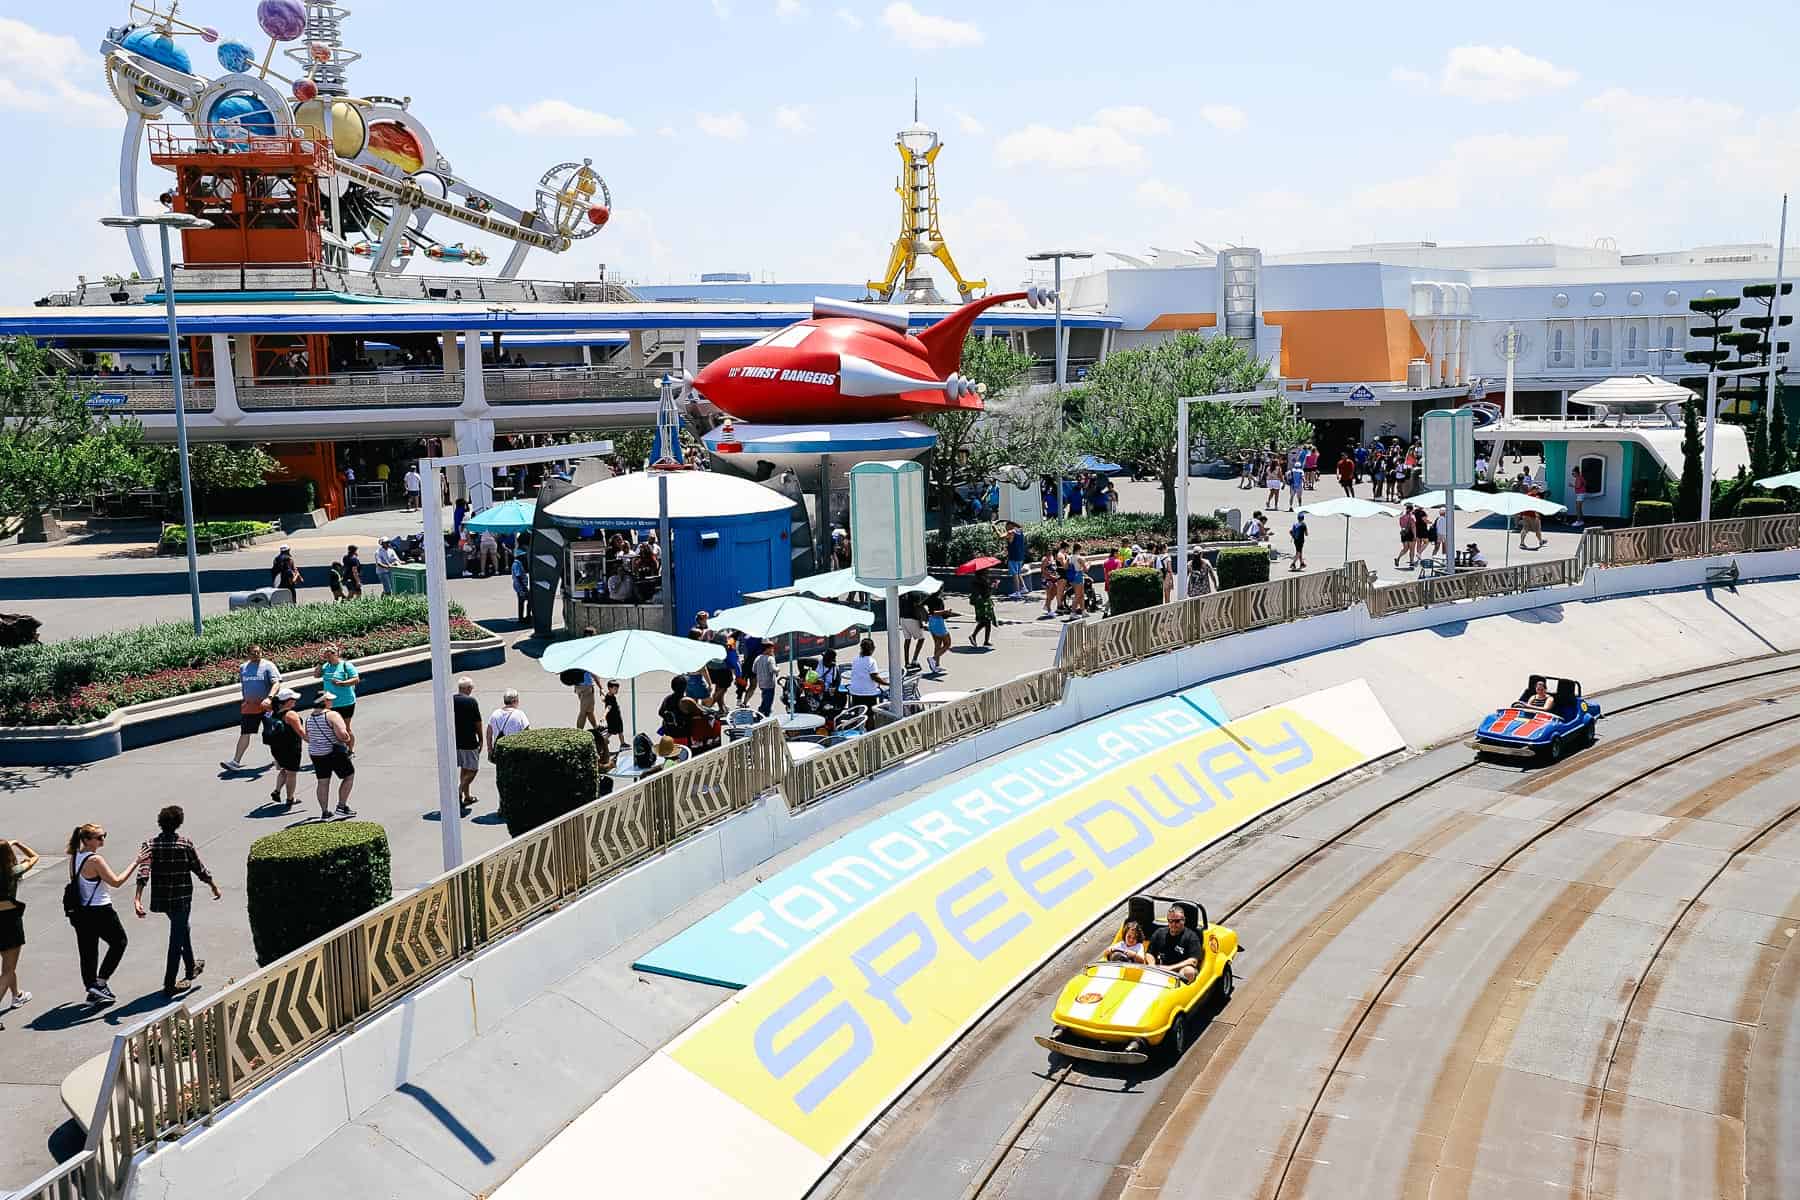 passing cars on the track below from the Peoplemover 